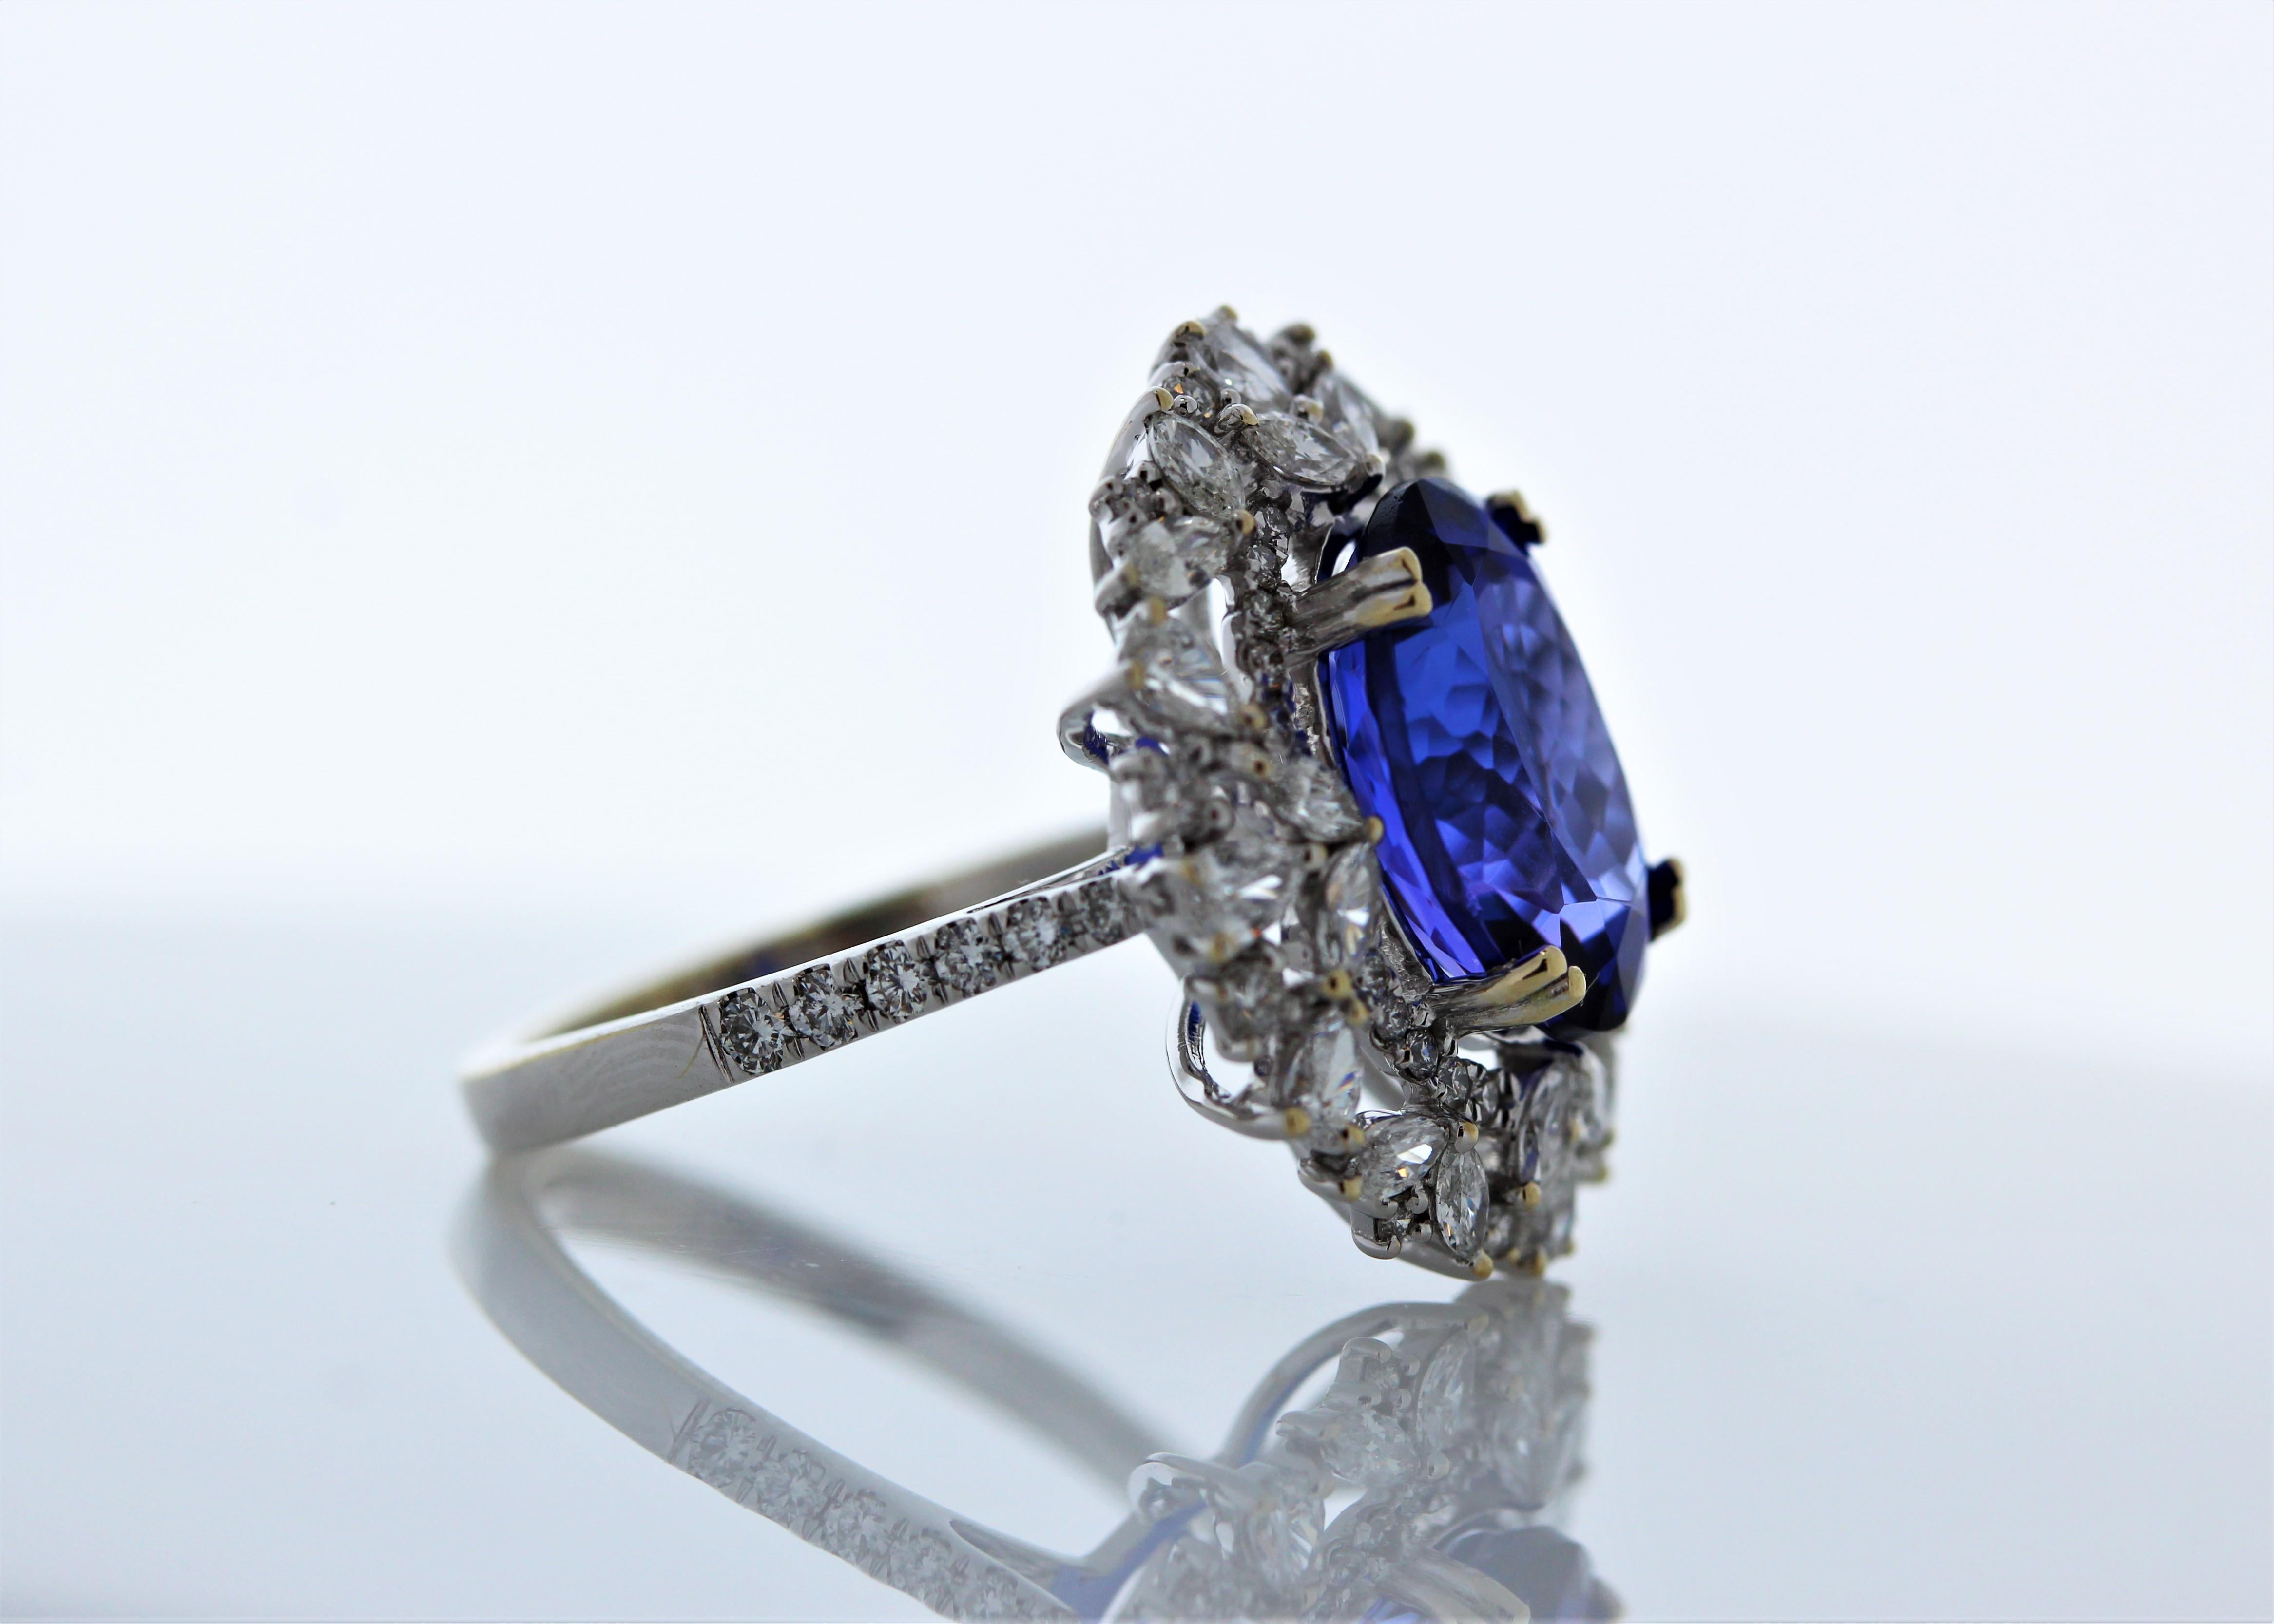 Designed with luxury in mind, this gorgeous cocktail ring showcases an 5.62carat oval cut tanzanite that exhibits a deep bluish-purple color. This gem source is near the foothills of Mt. Kilimanjaro in Tanzania. Its transparency and luster are